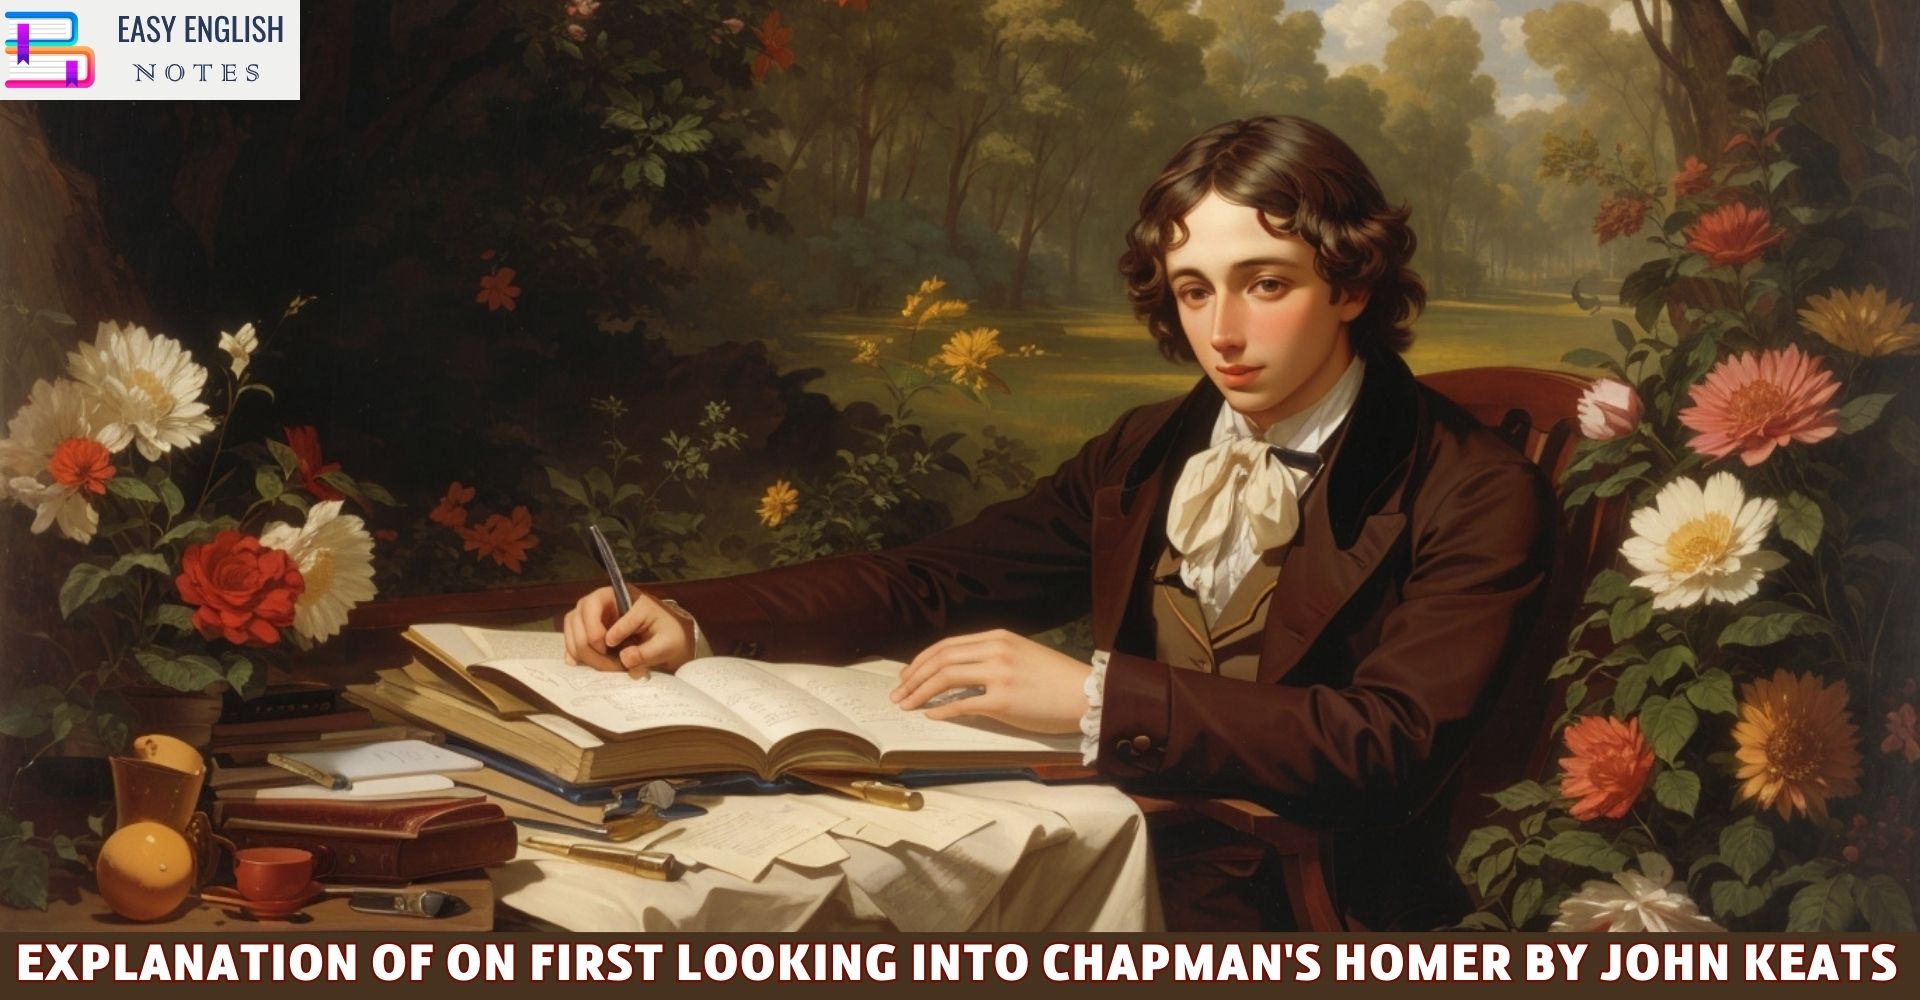 Explanation Of On First Looking Into Chapman's Homer By John Keats